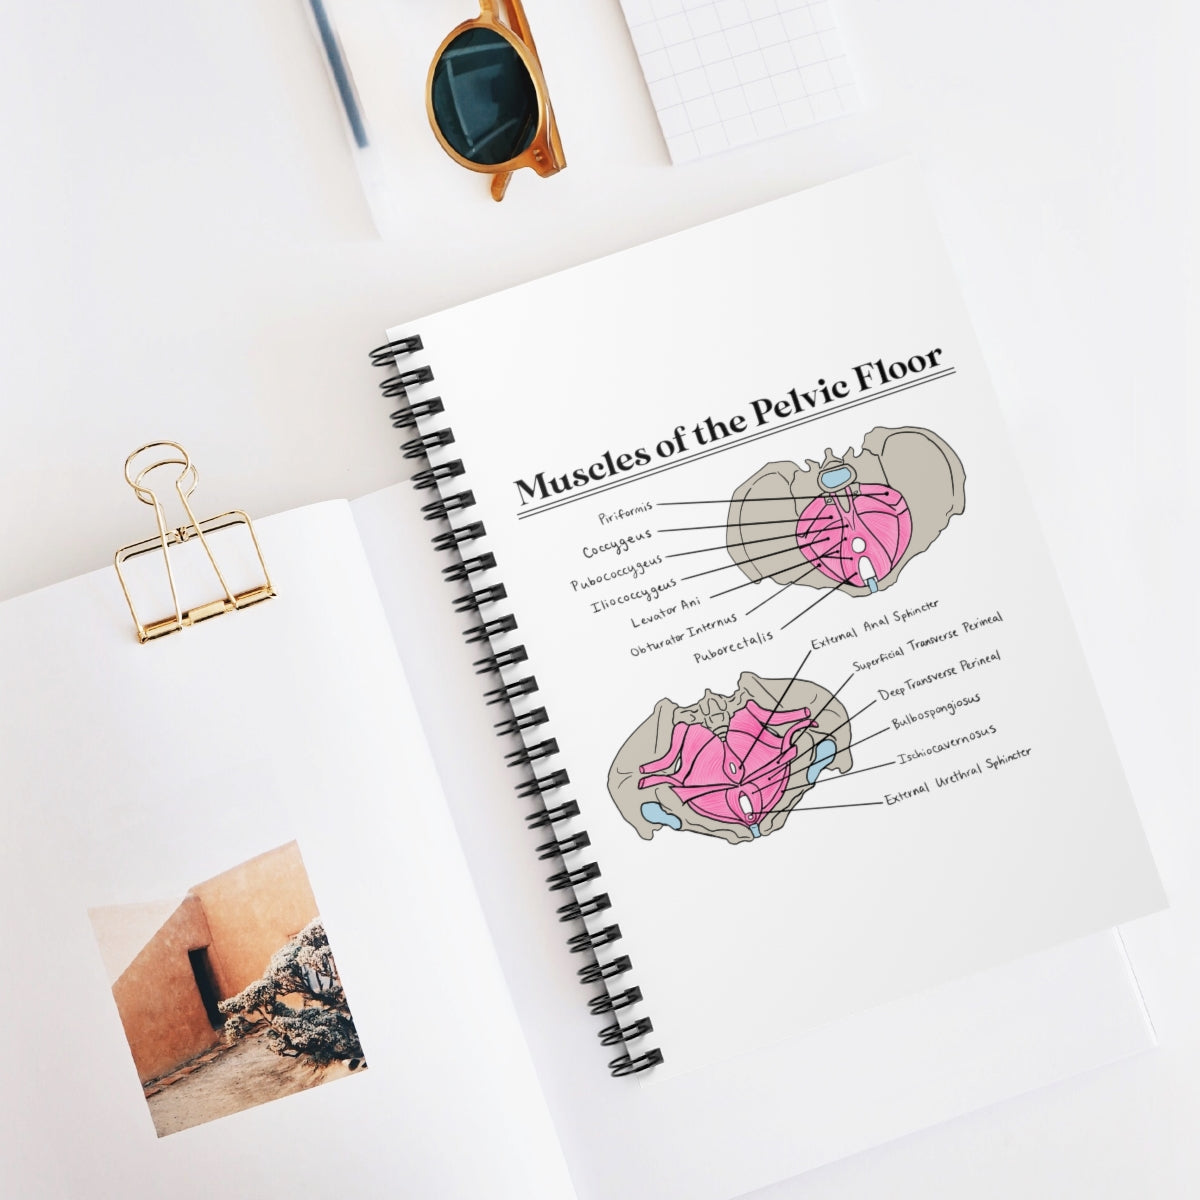 Muscles of the Pelvic Floor Notebook